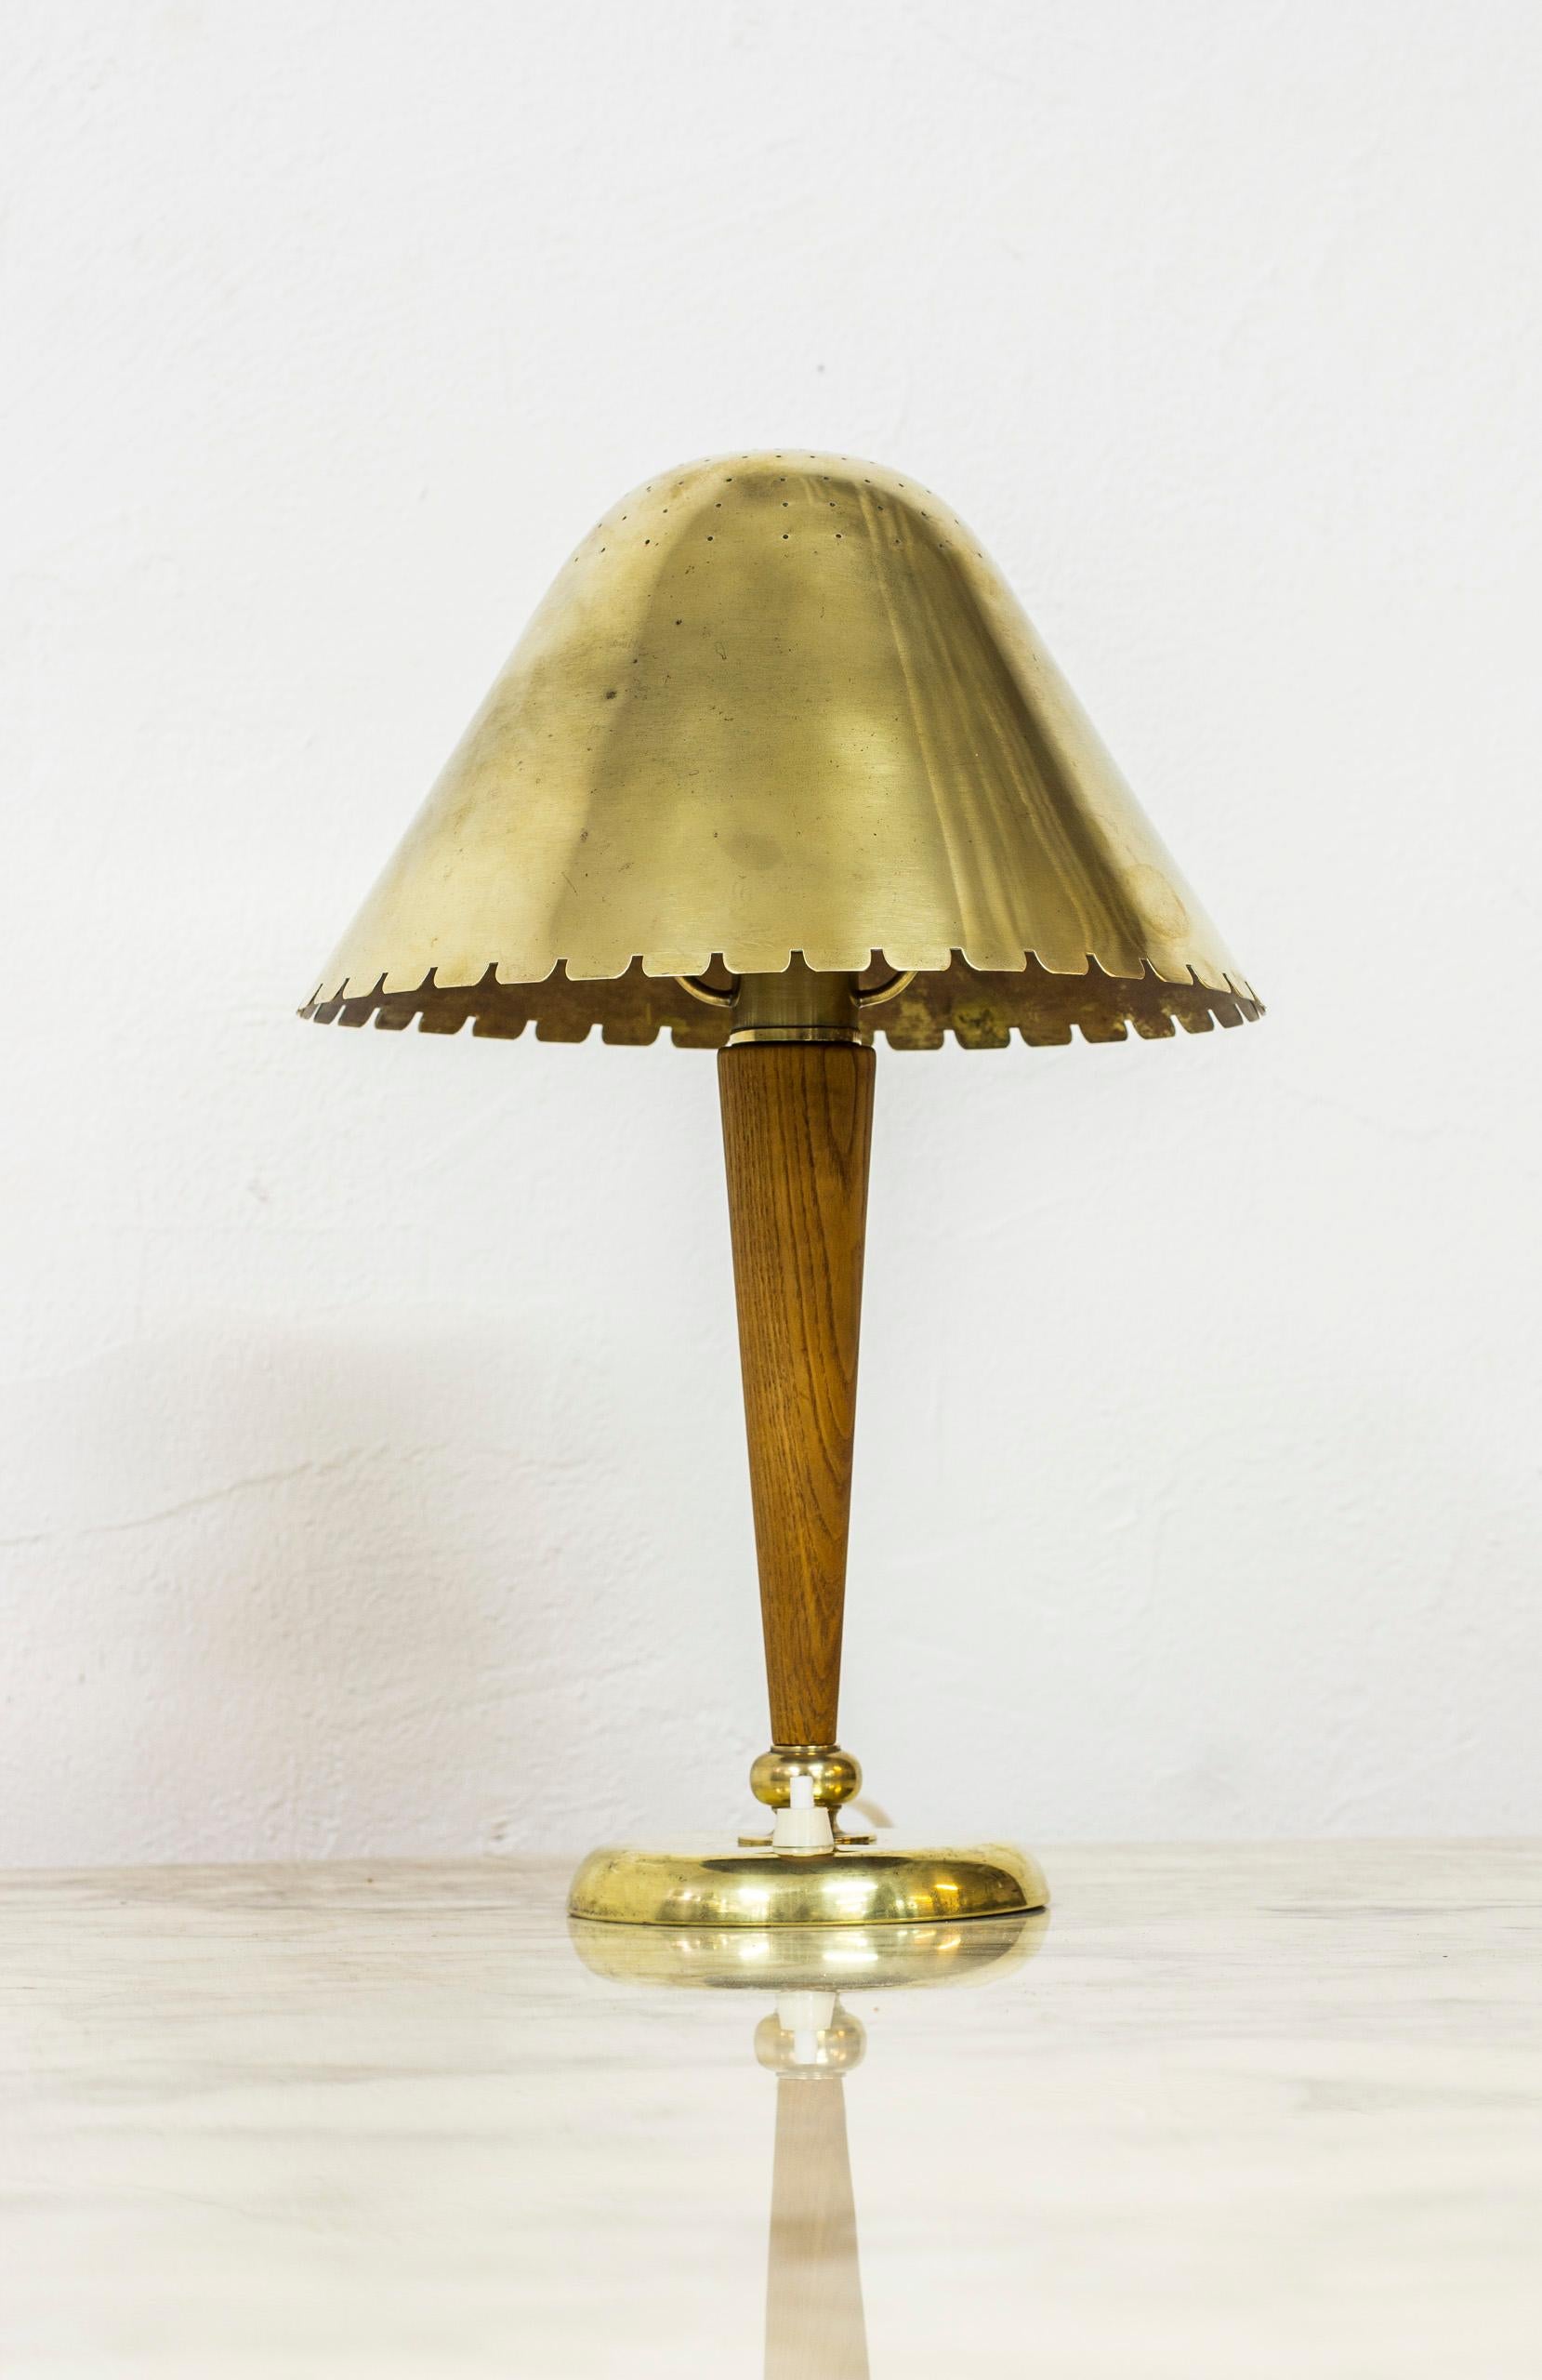 Small table lamp attributed to Harald Elof Notini in Sweden during the 1940s. Likely produced by Böhlmarks in Stockholm, Sweden. Solid oak and brass base with perforated brass shade. Light switch on the base in working condition. Good condition with